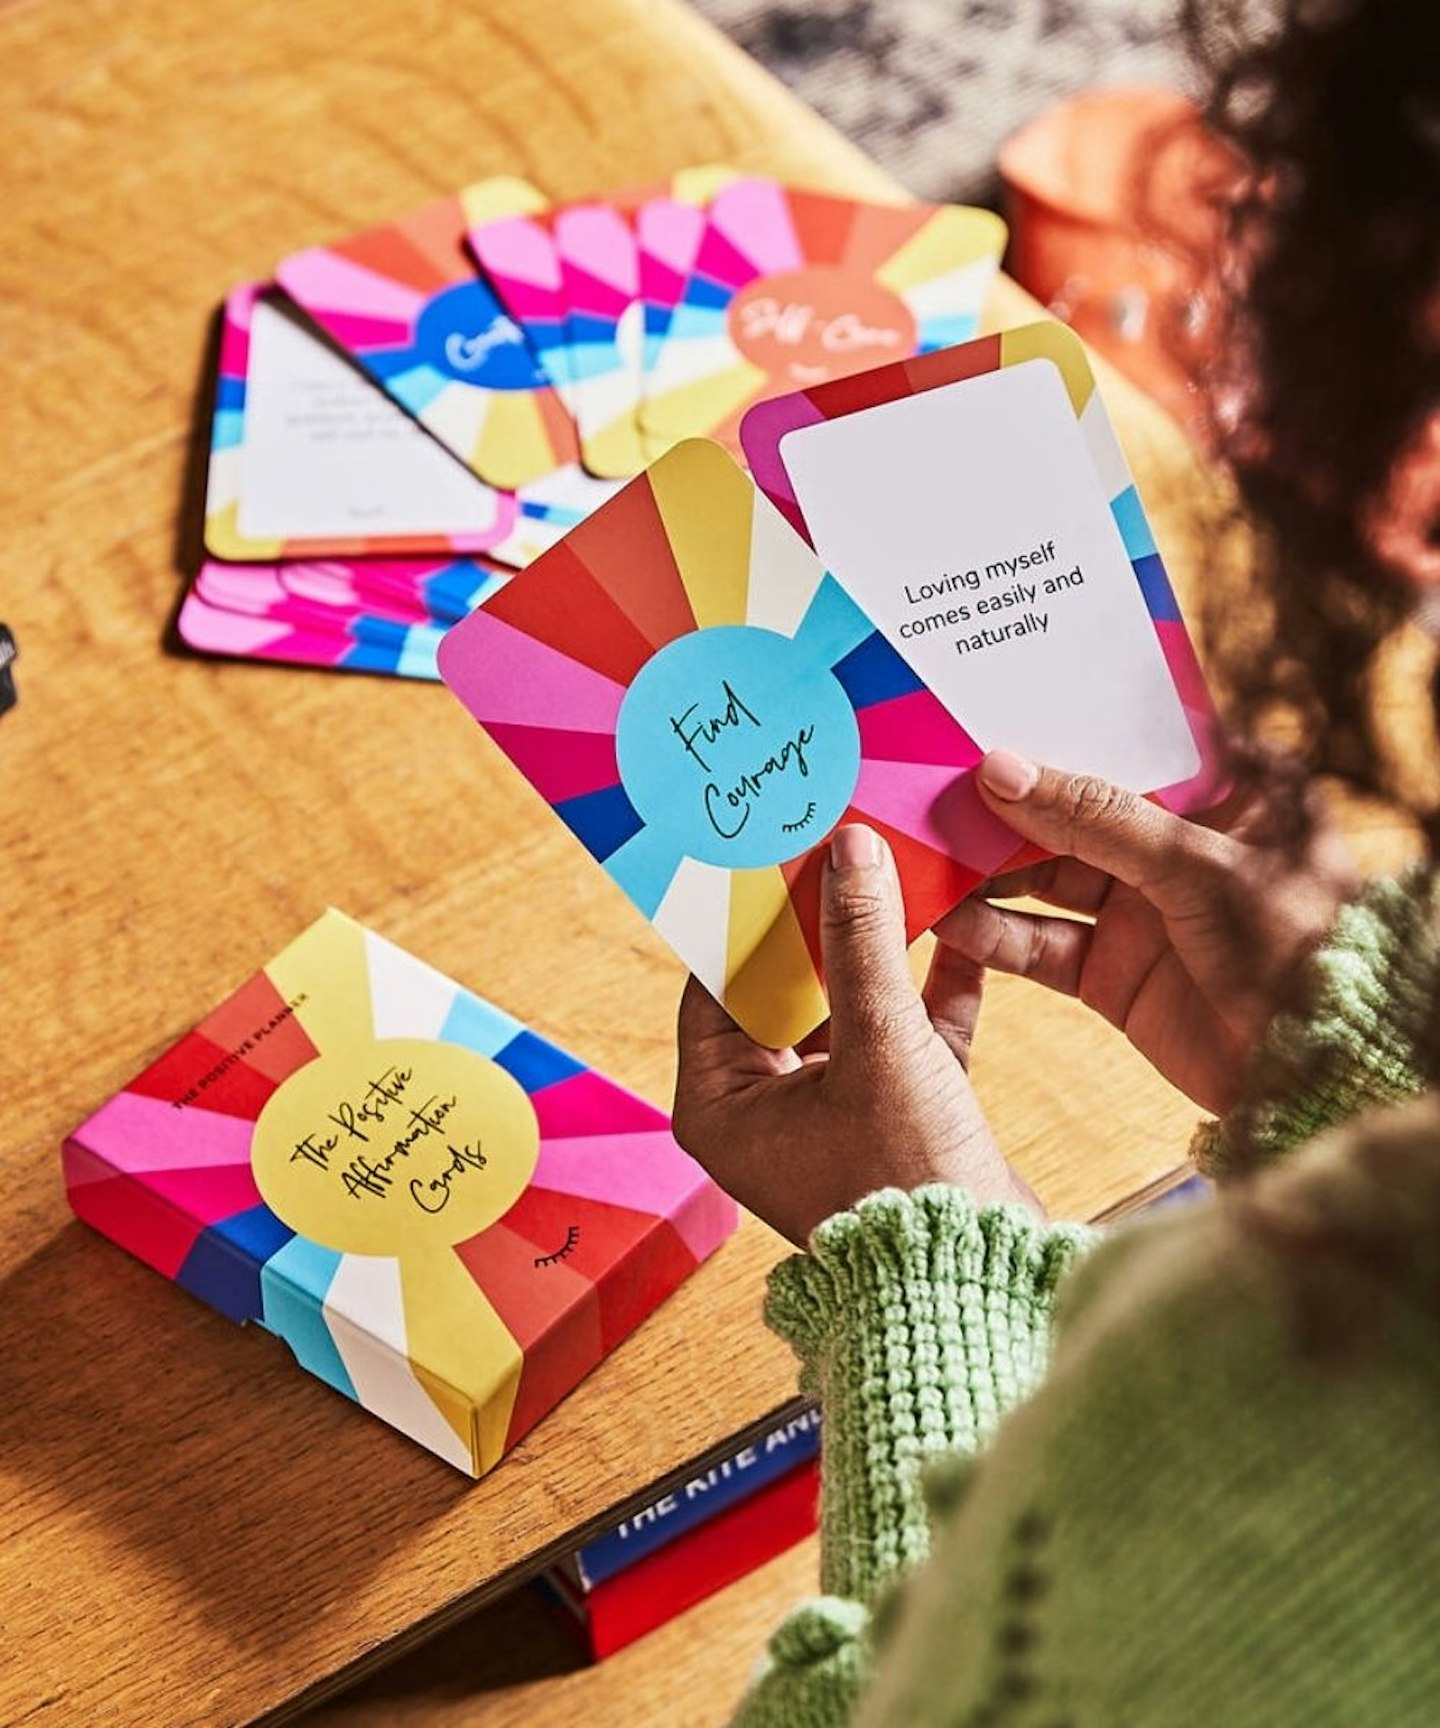 The Positive Affirmation Cards